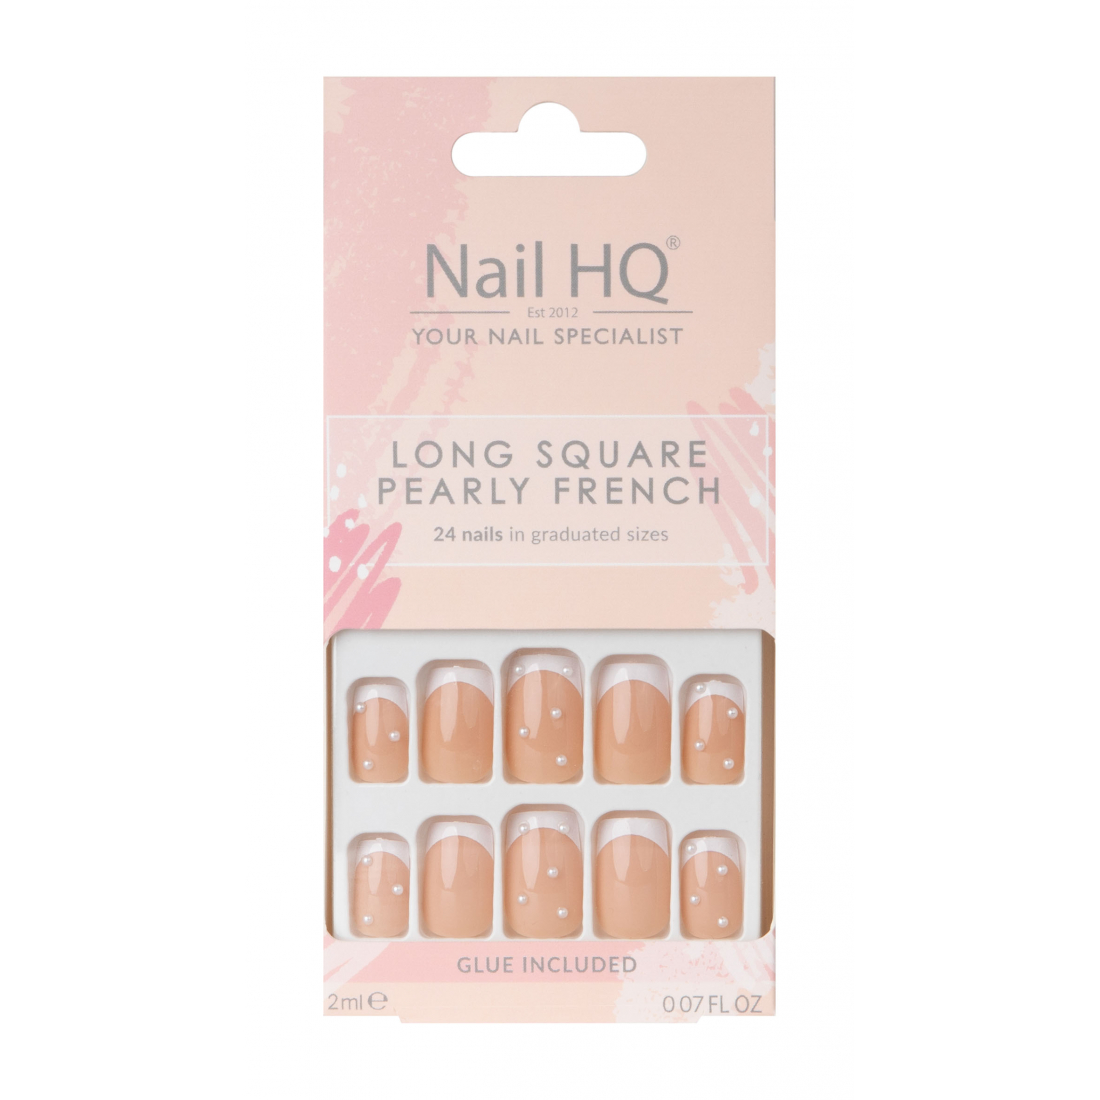 'Long Square Pearly French' Falsche Nägel -24 Stücke